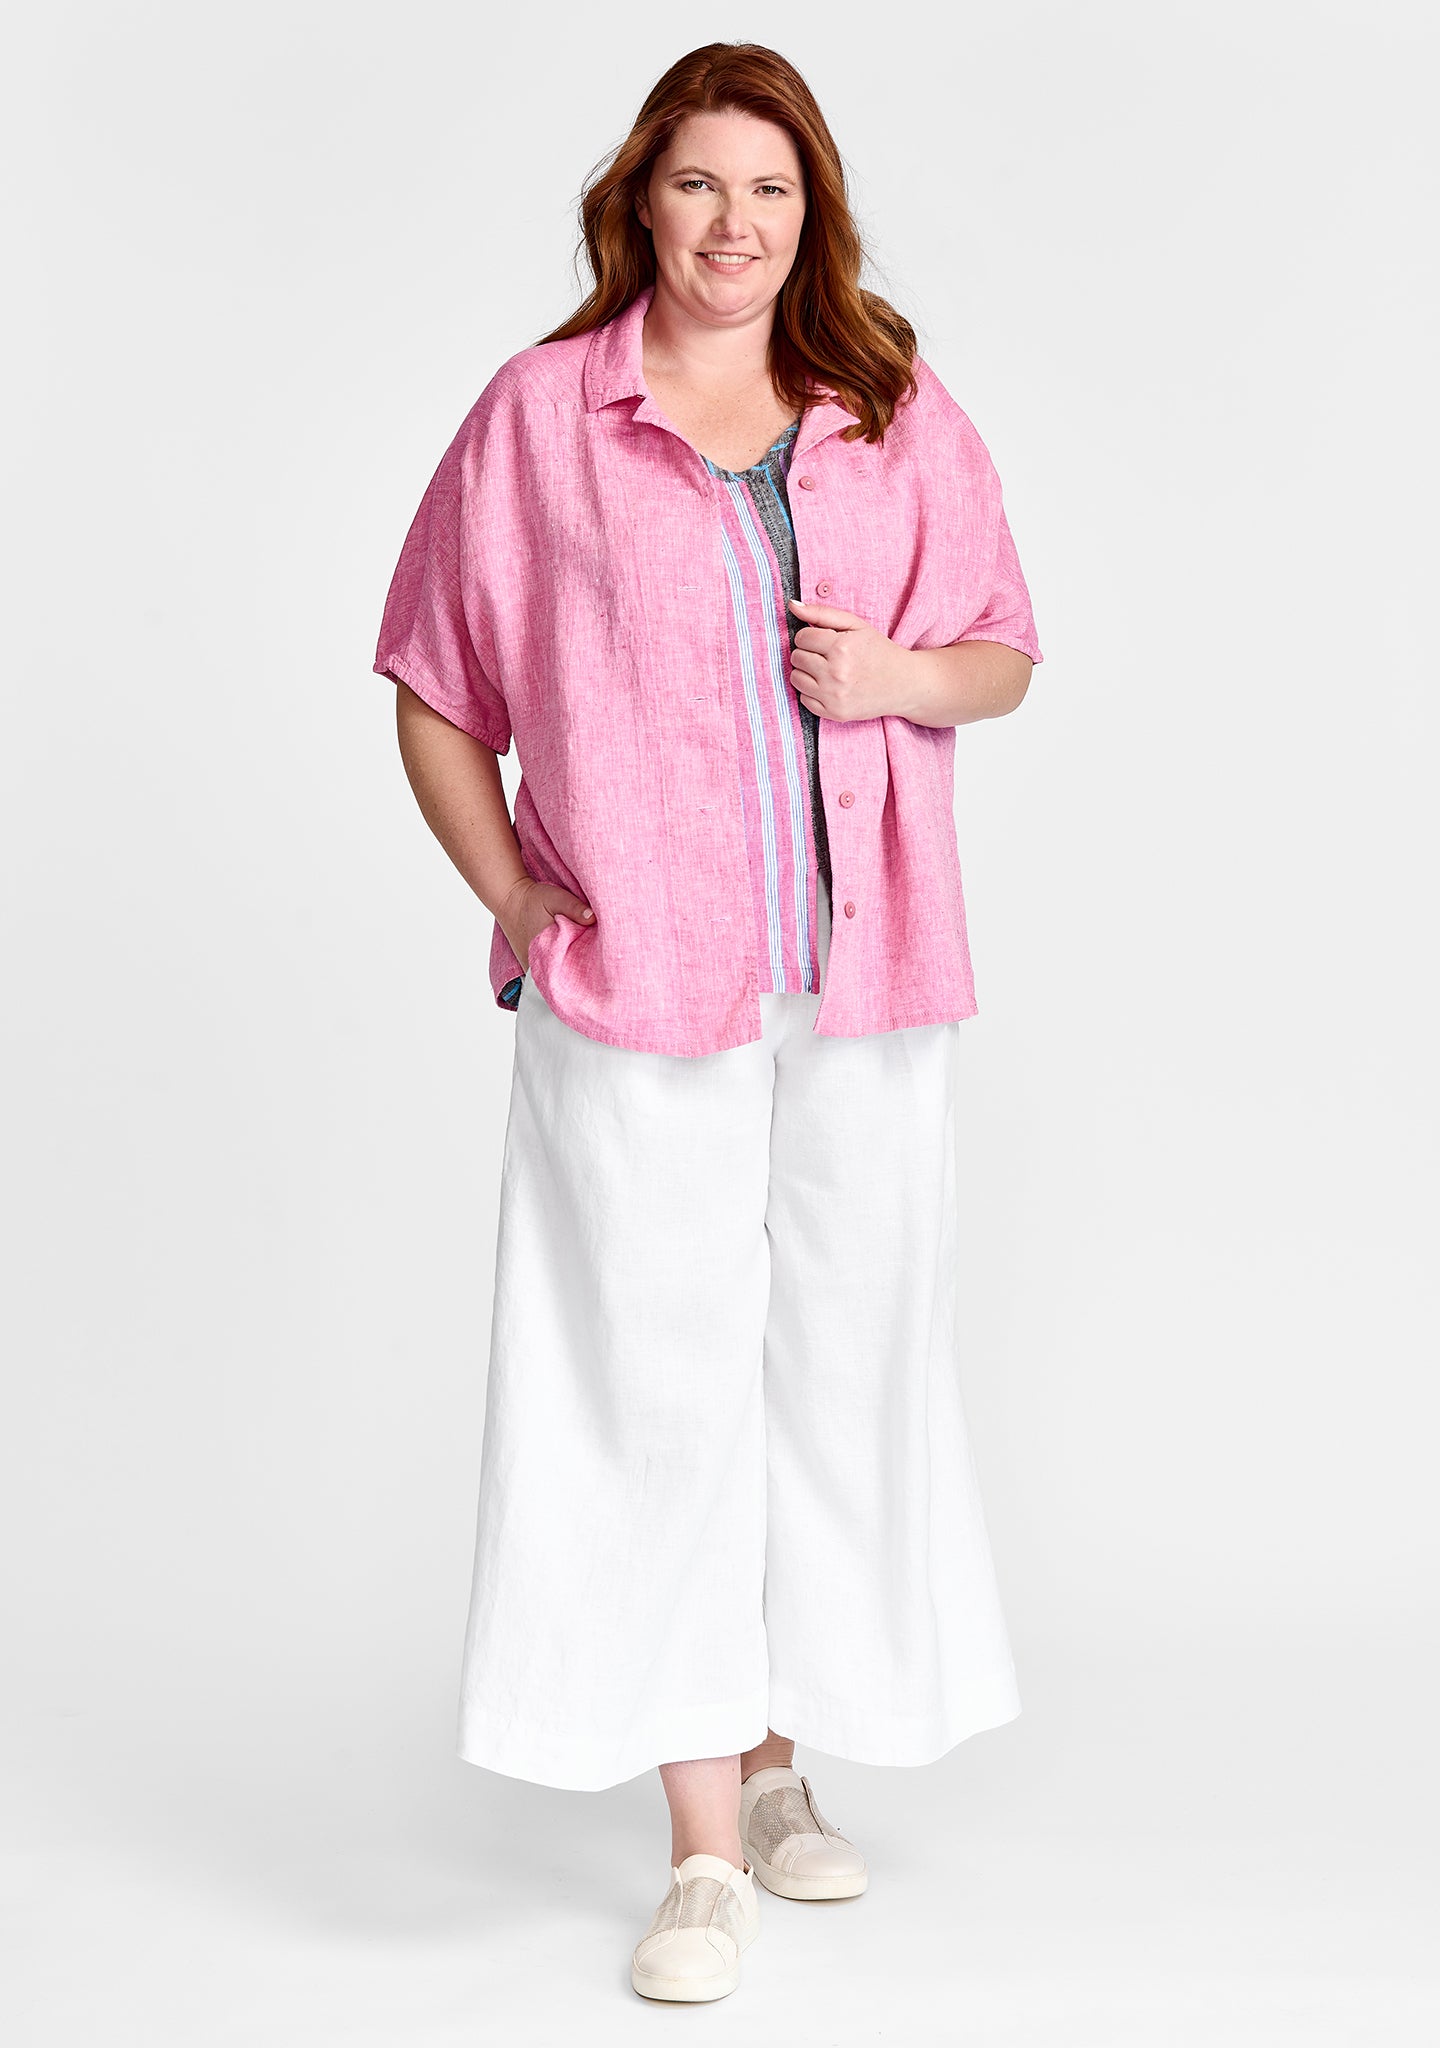 FLAX linen shirt in pink with linen tank in stripes and linen pants in white